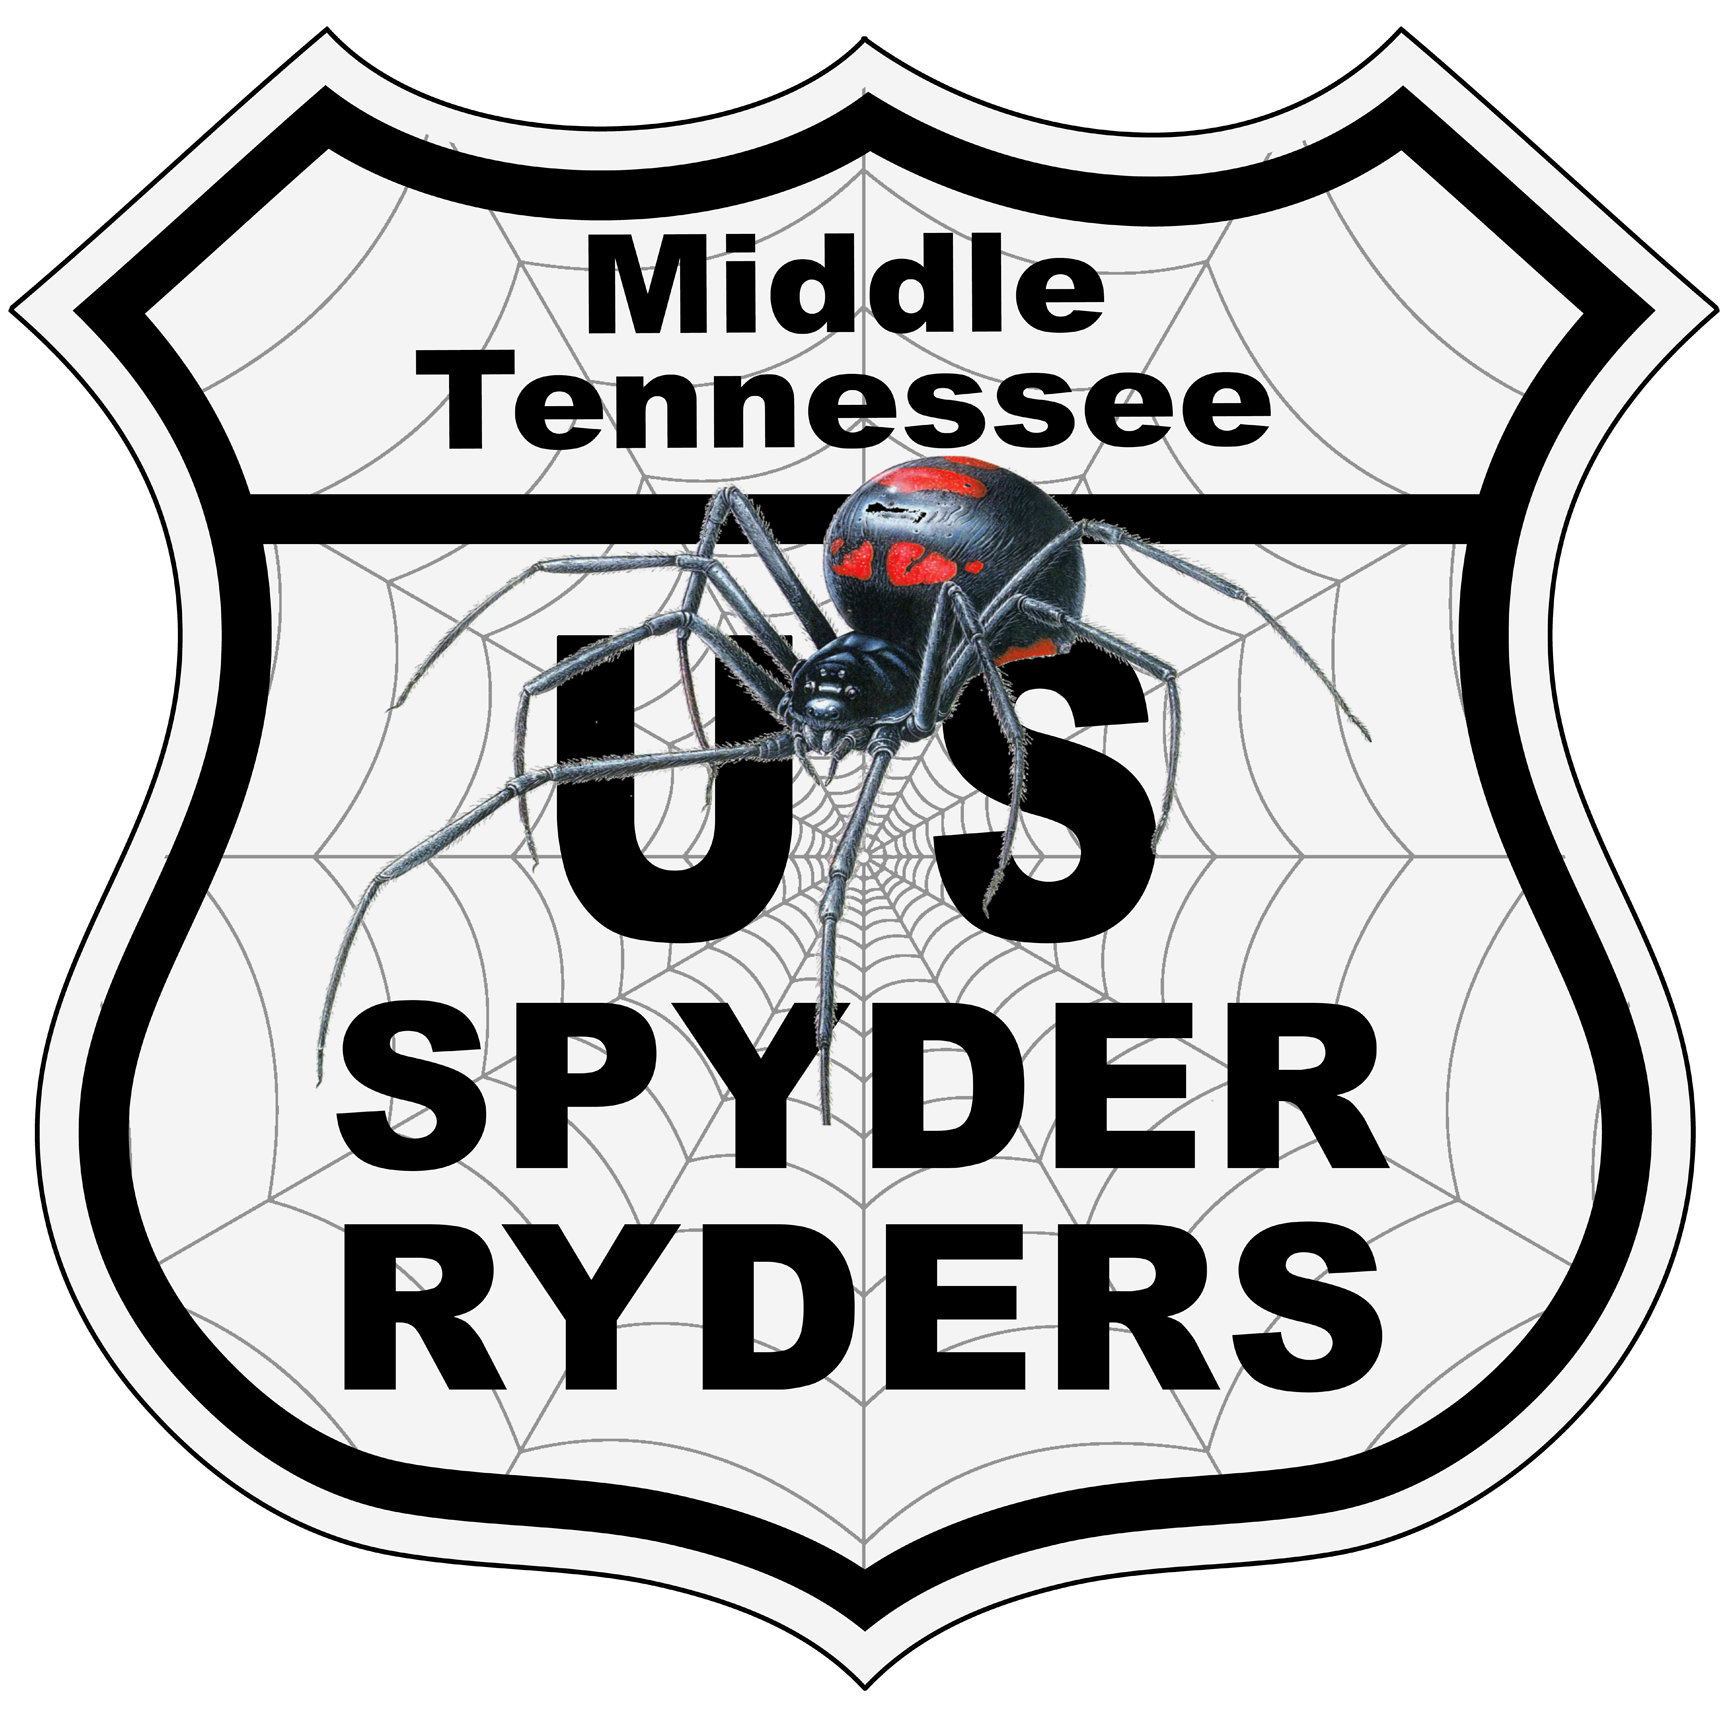 US-SR TN Middle Tennessee.png